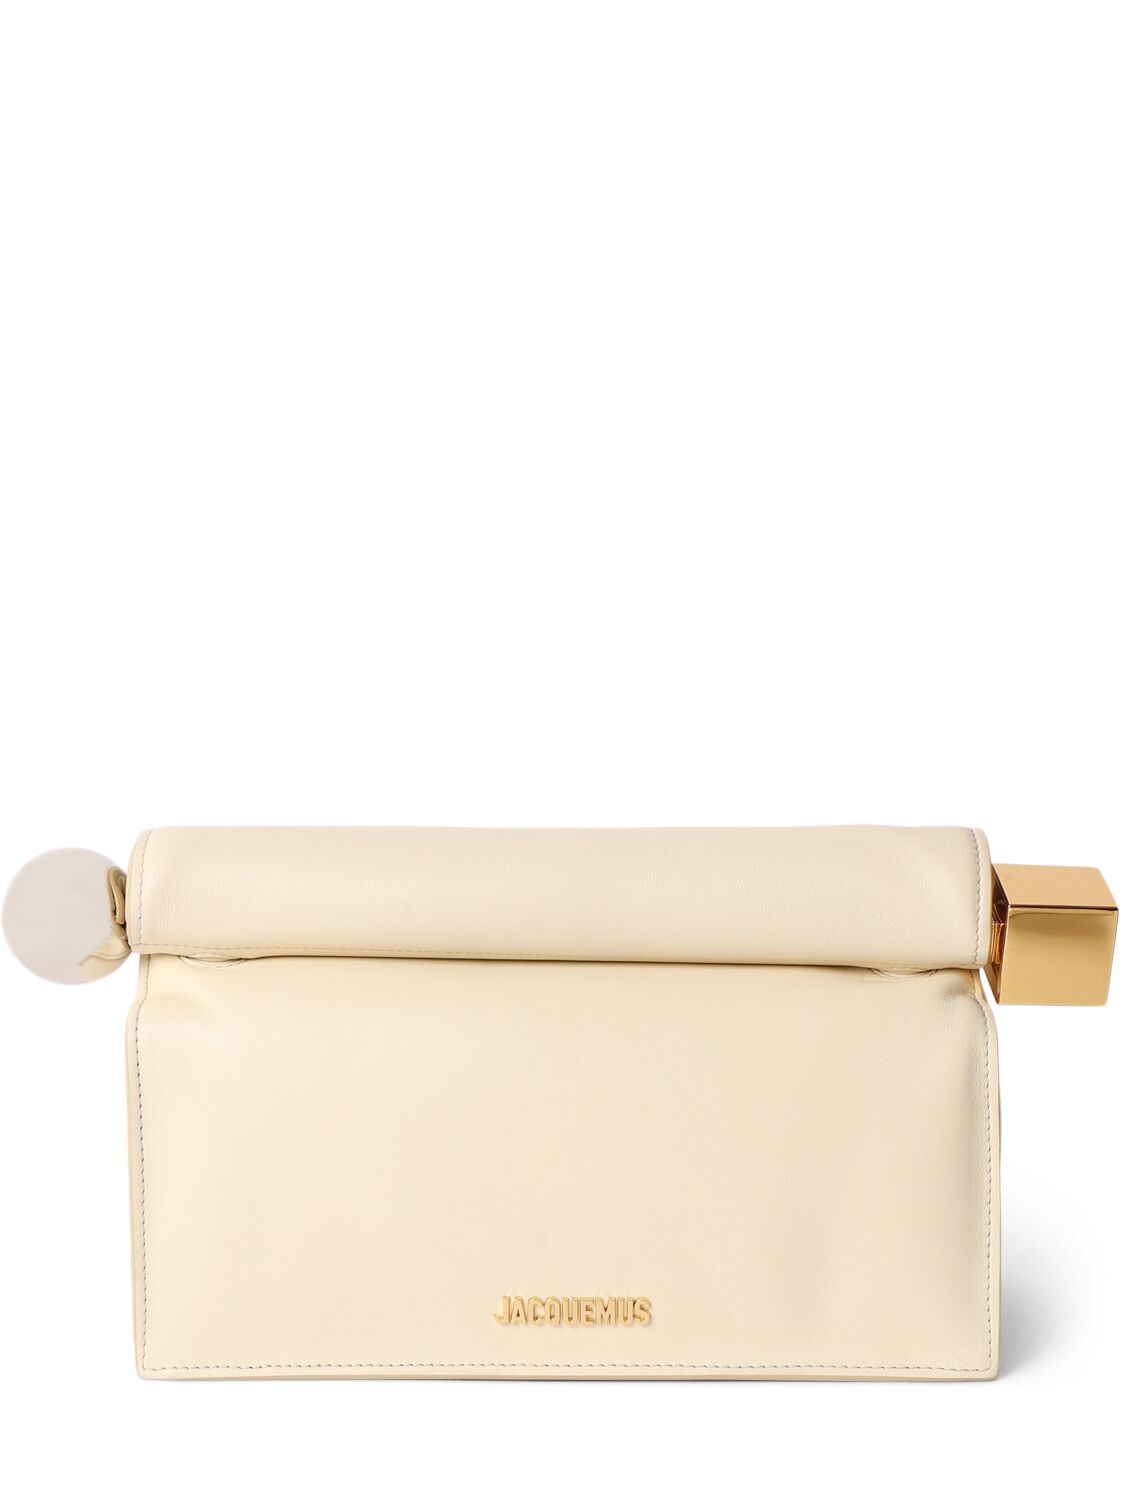 Jacquemus La Pochette Rond Carre Leather Clutch In Light Ivory